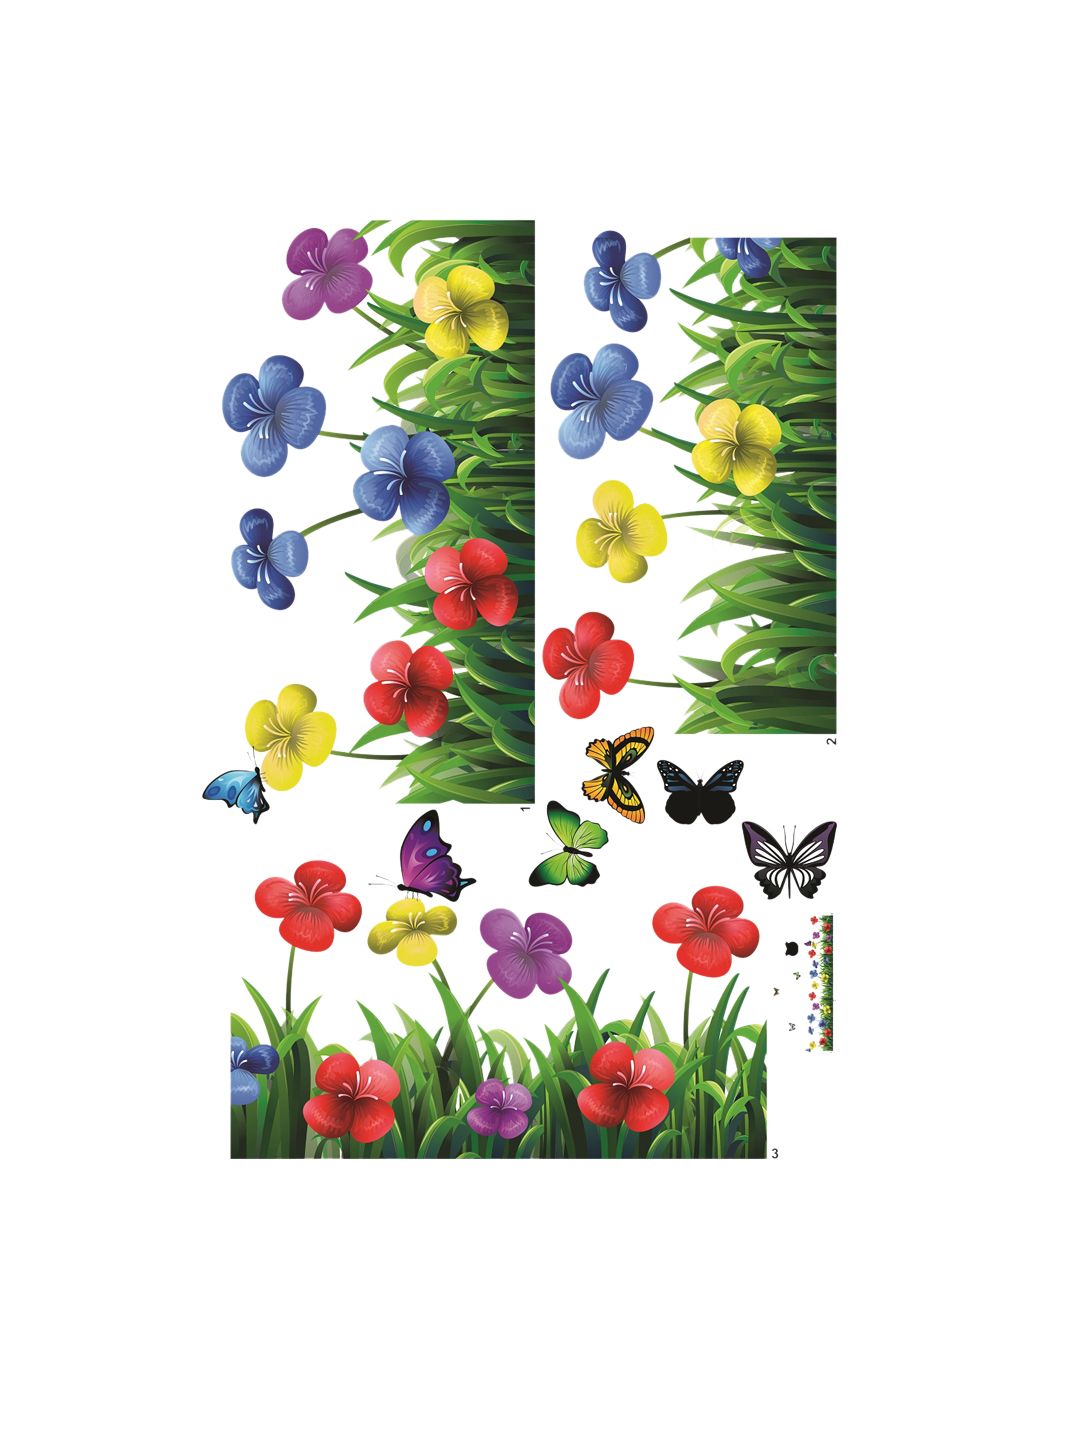 WALLSTICK White & Green Floral Large Vinyl Wall Sticker Price in India